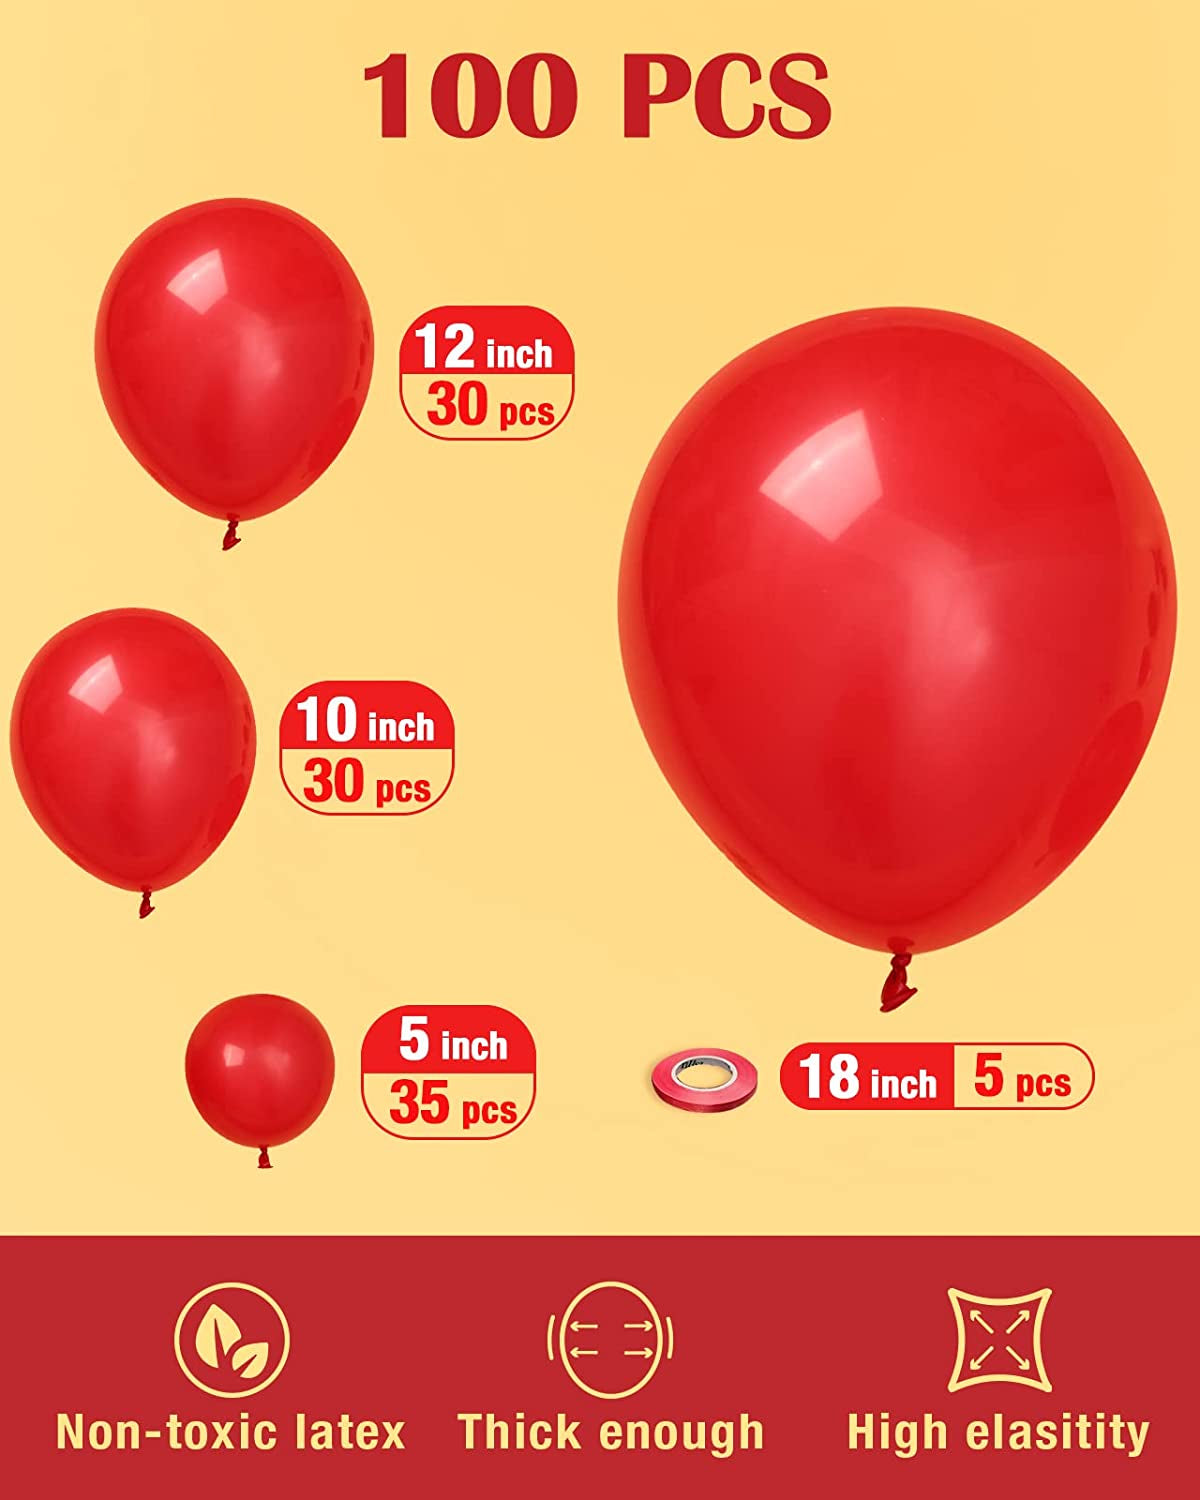 100Pcs Red Latex Balloons - Assorted Sizes for Birthday, Party Decorations 